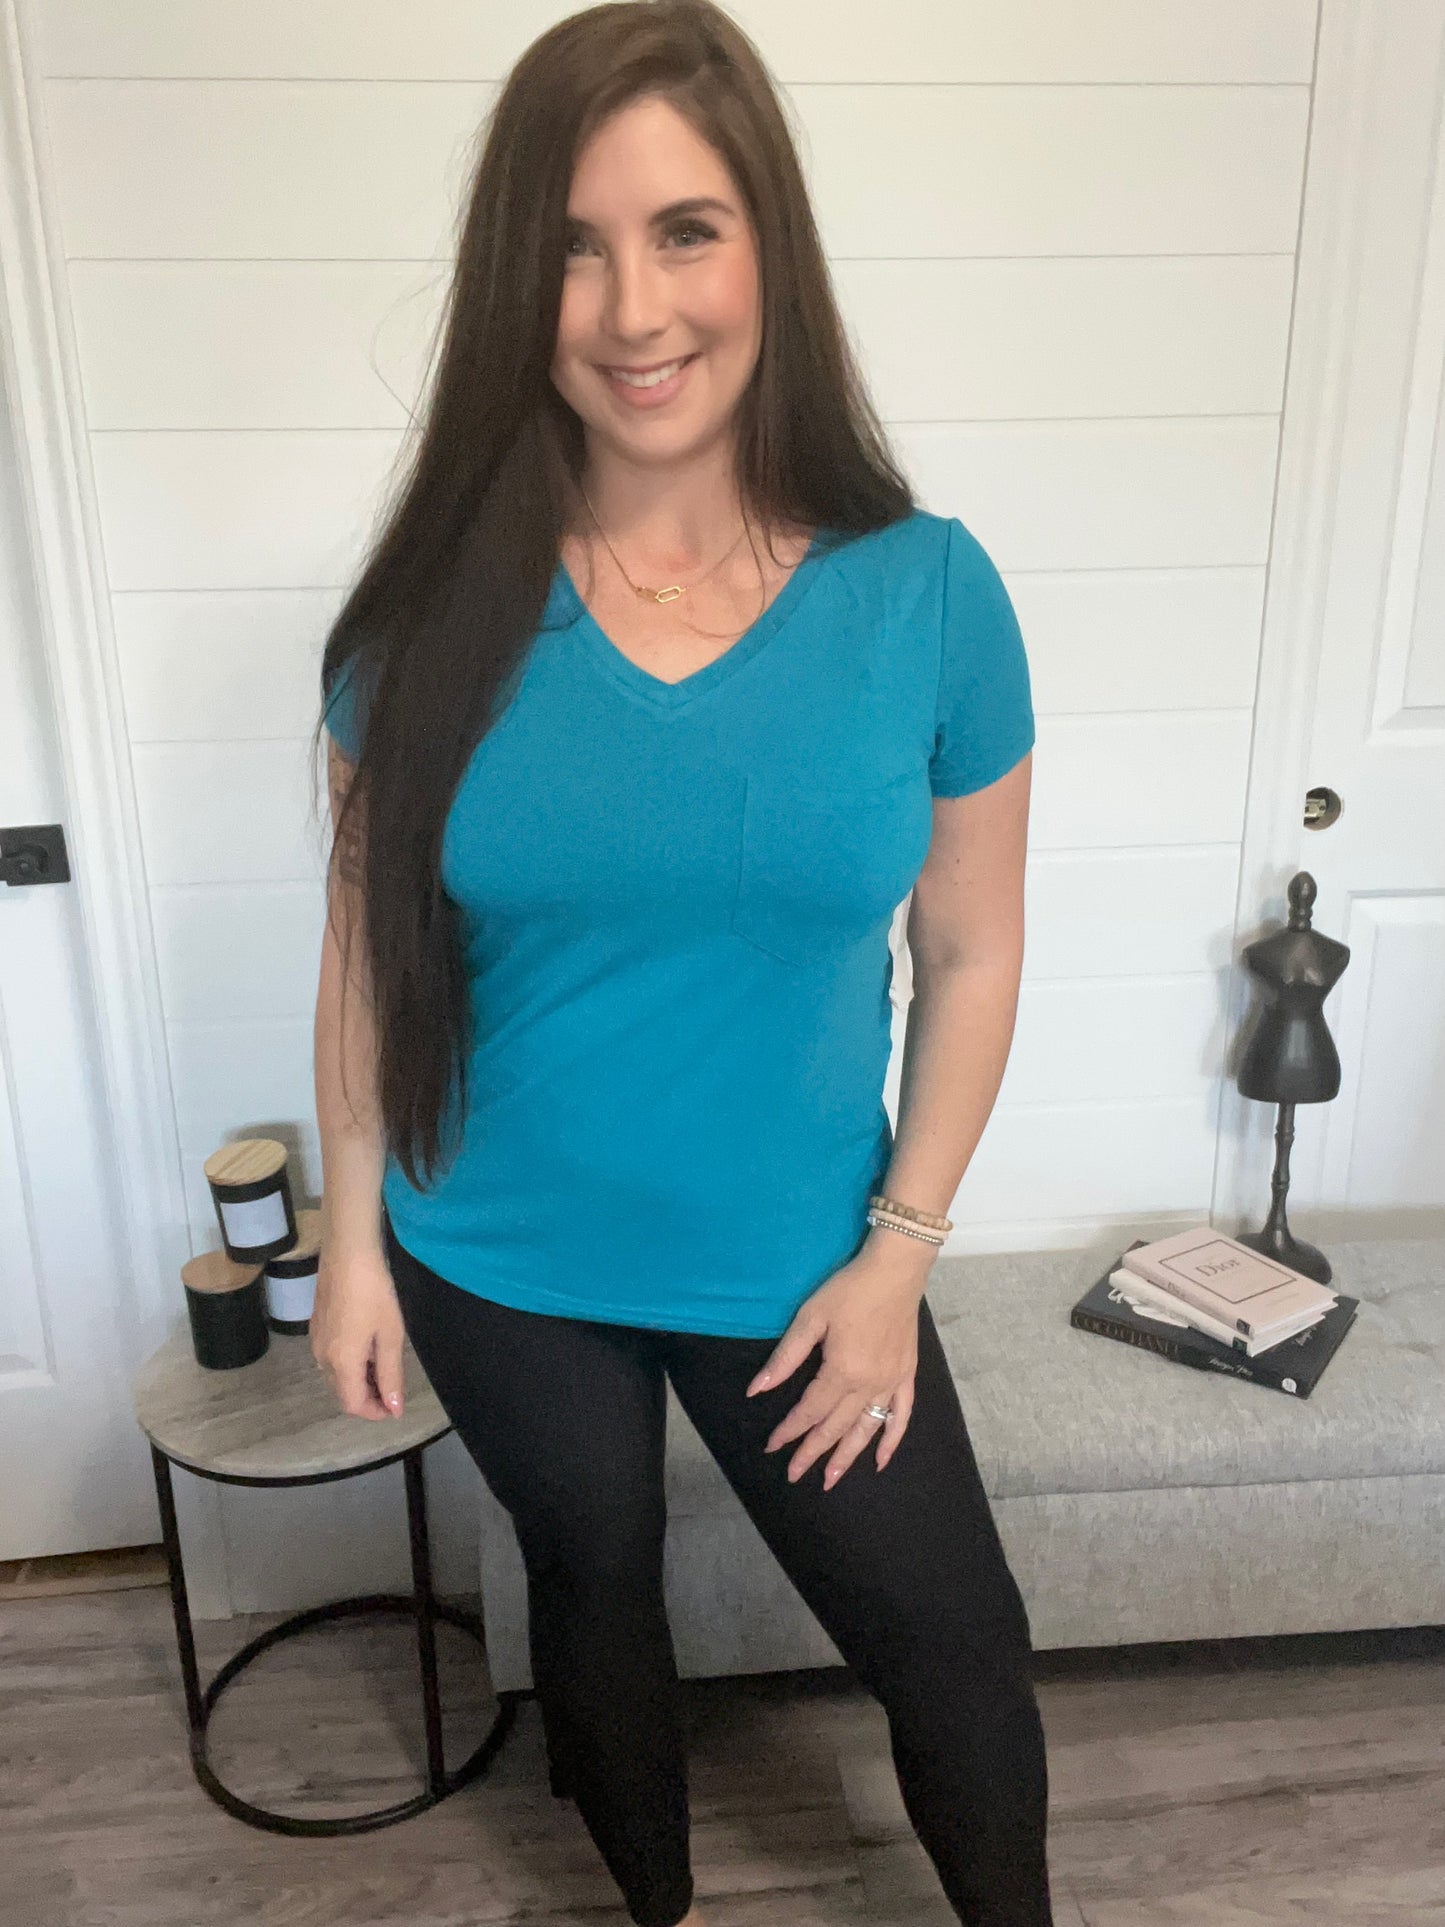 Grace & Lace Teal True Fit Perfect Pocket Tee